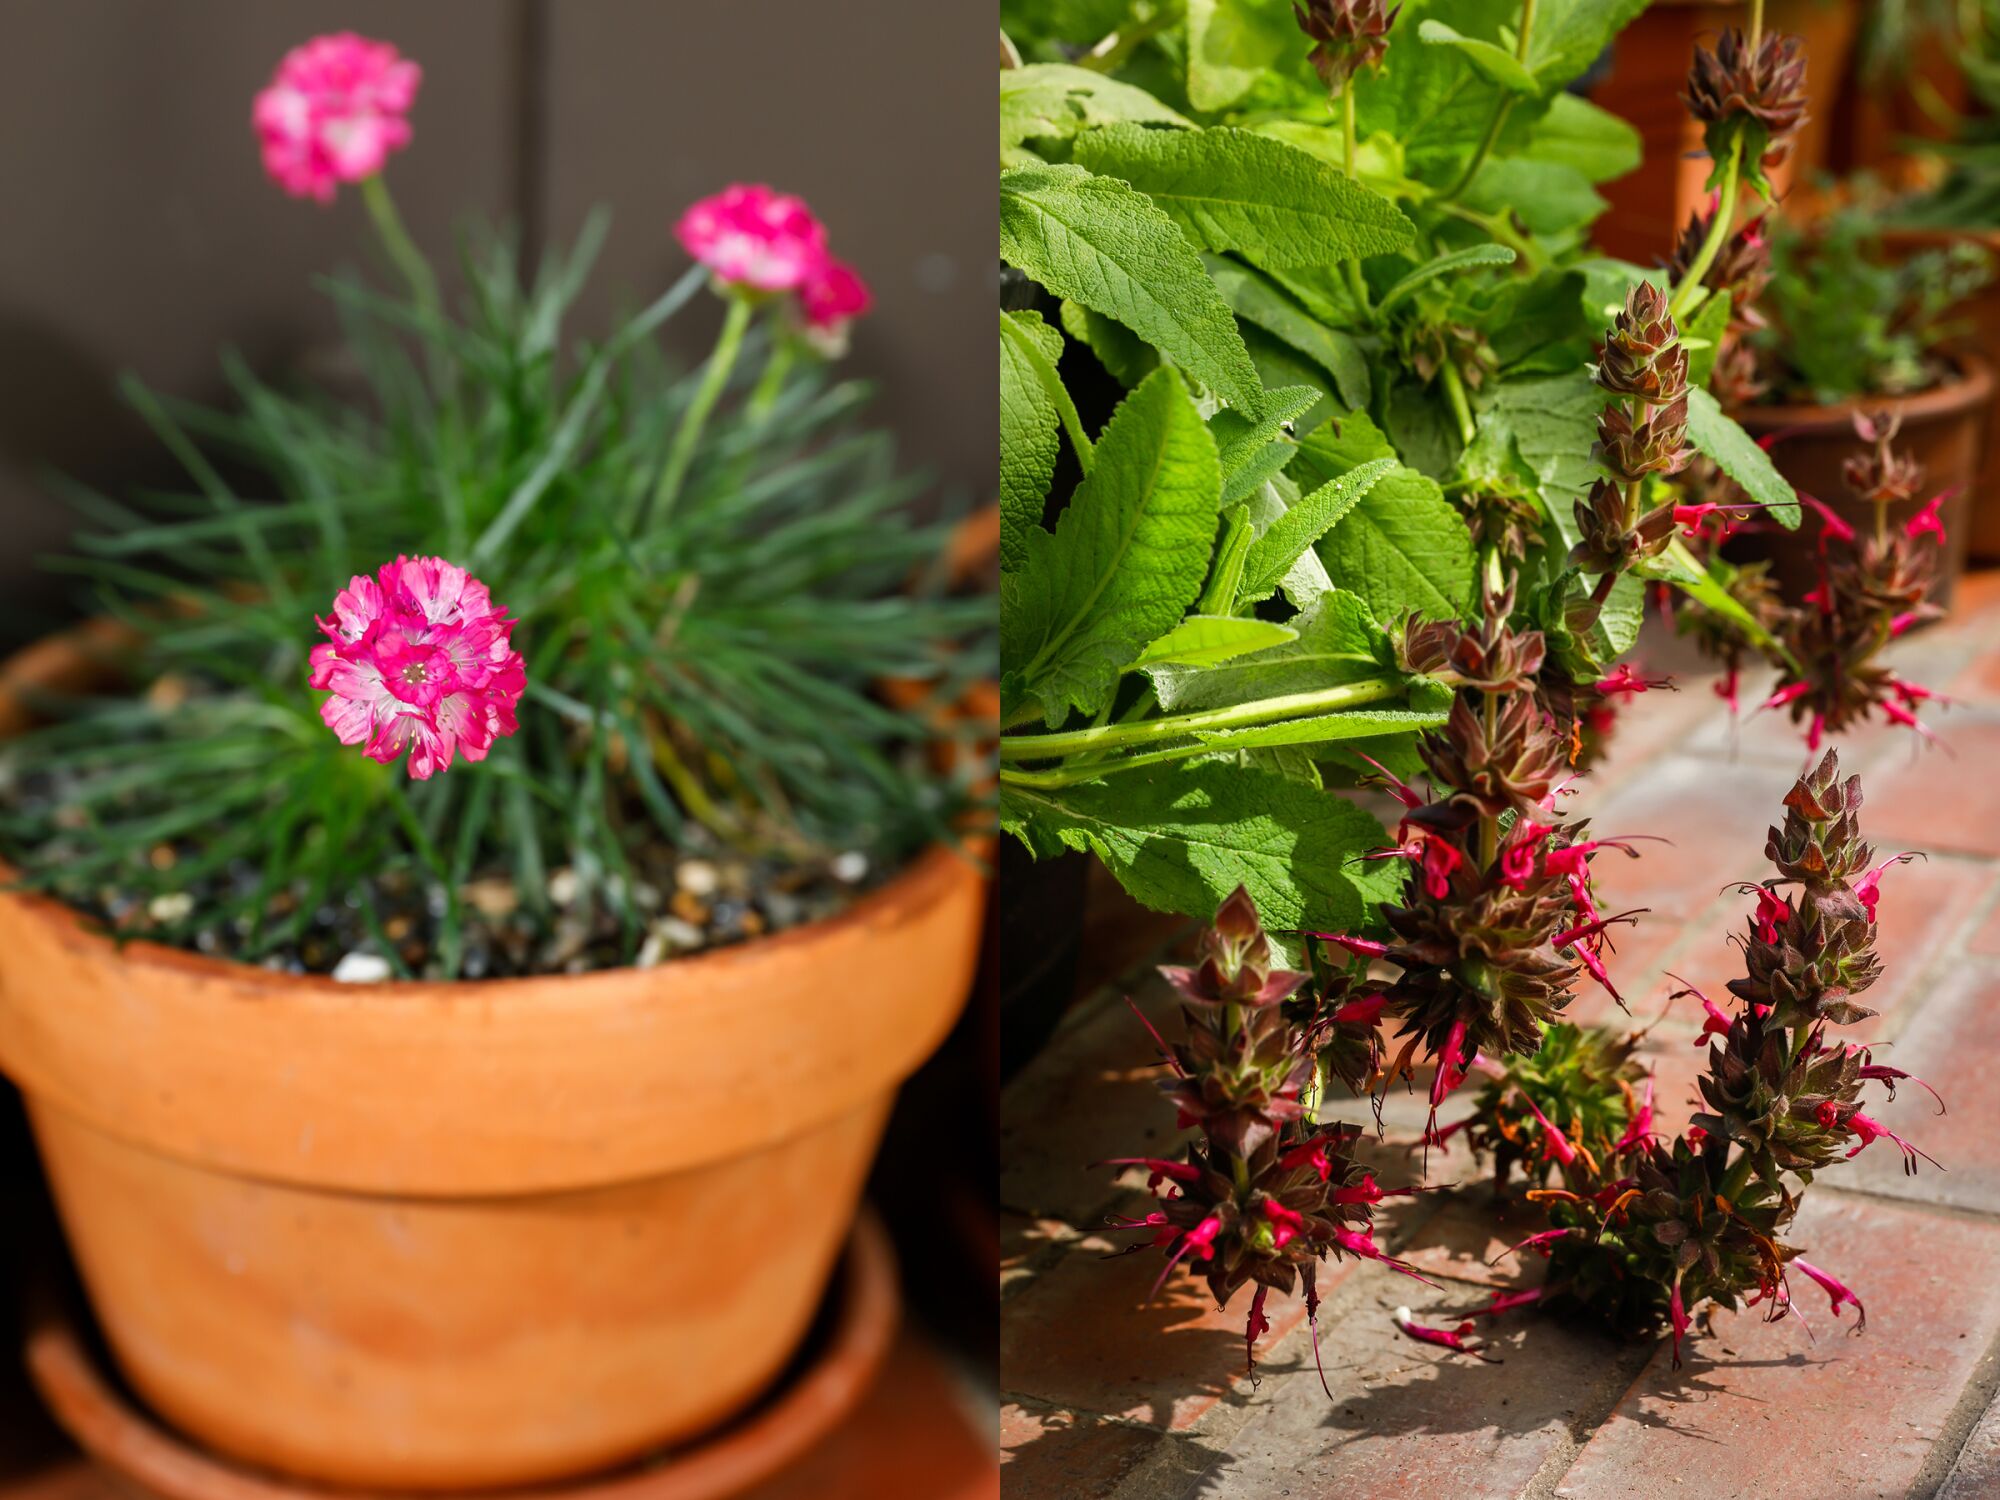 A terracotta pot of thrift seapink, left, and the trailing magenta blooms of hummingbird sage, right.